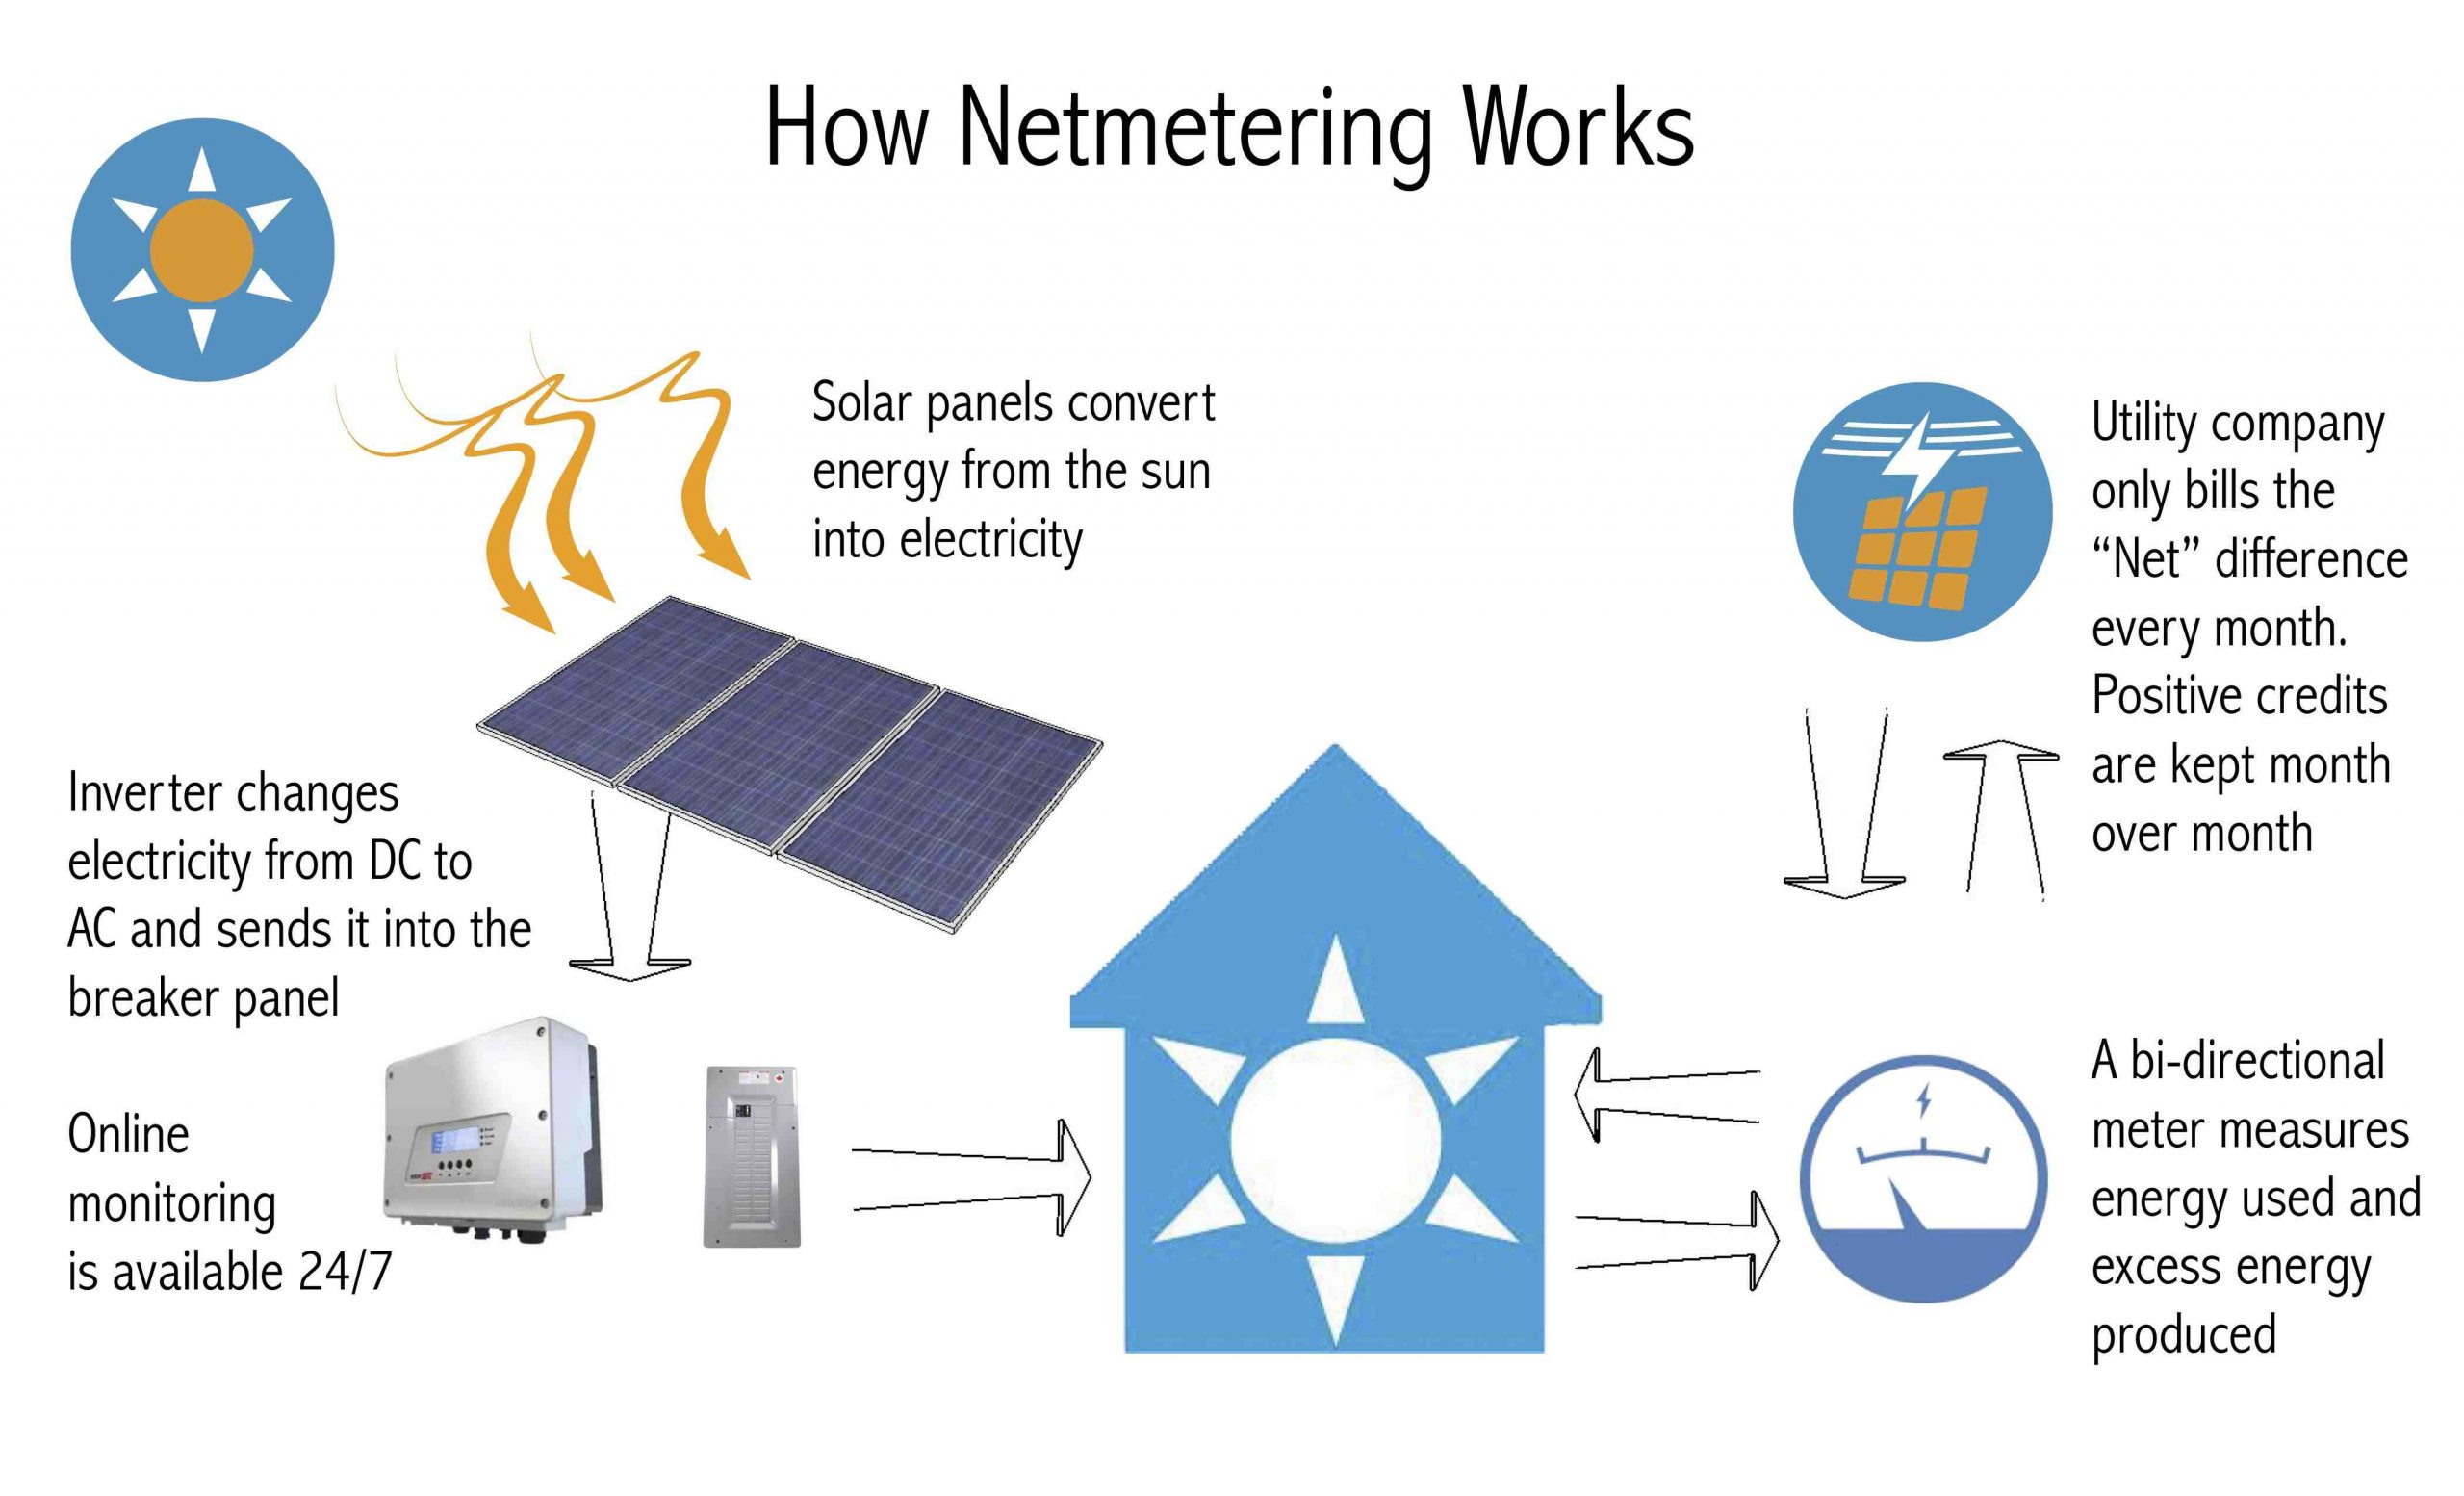 Why solar energy is important for future?